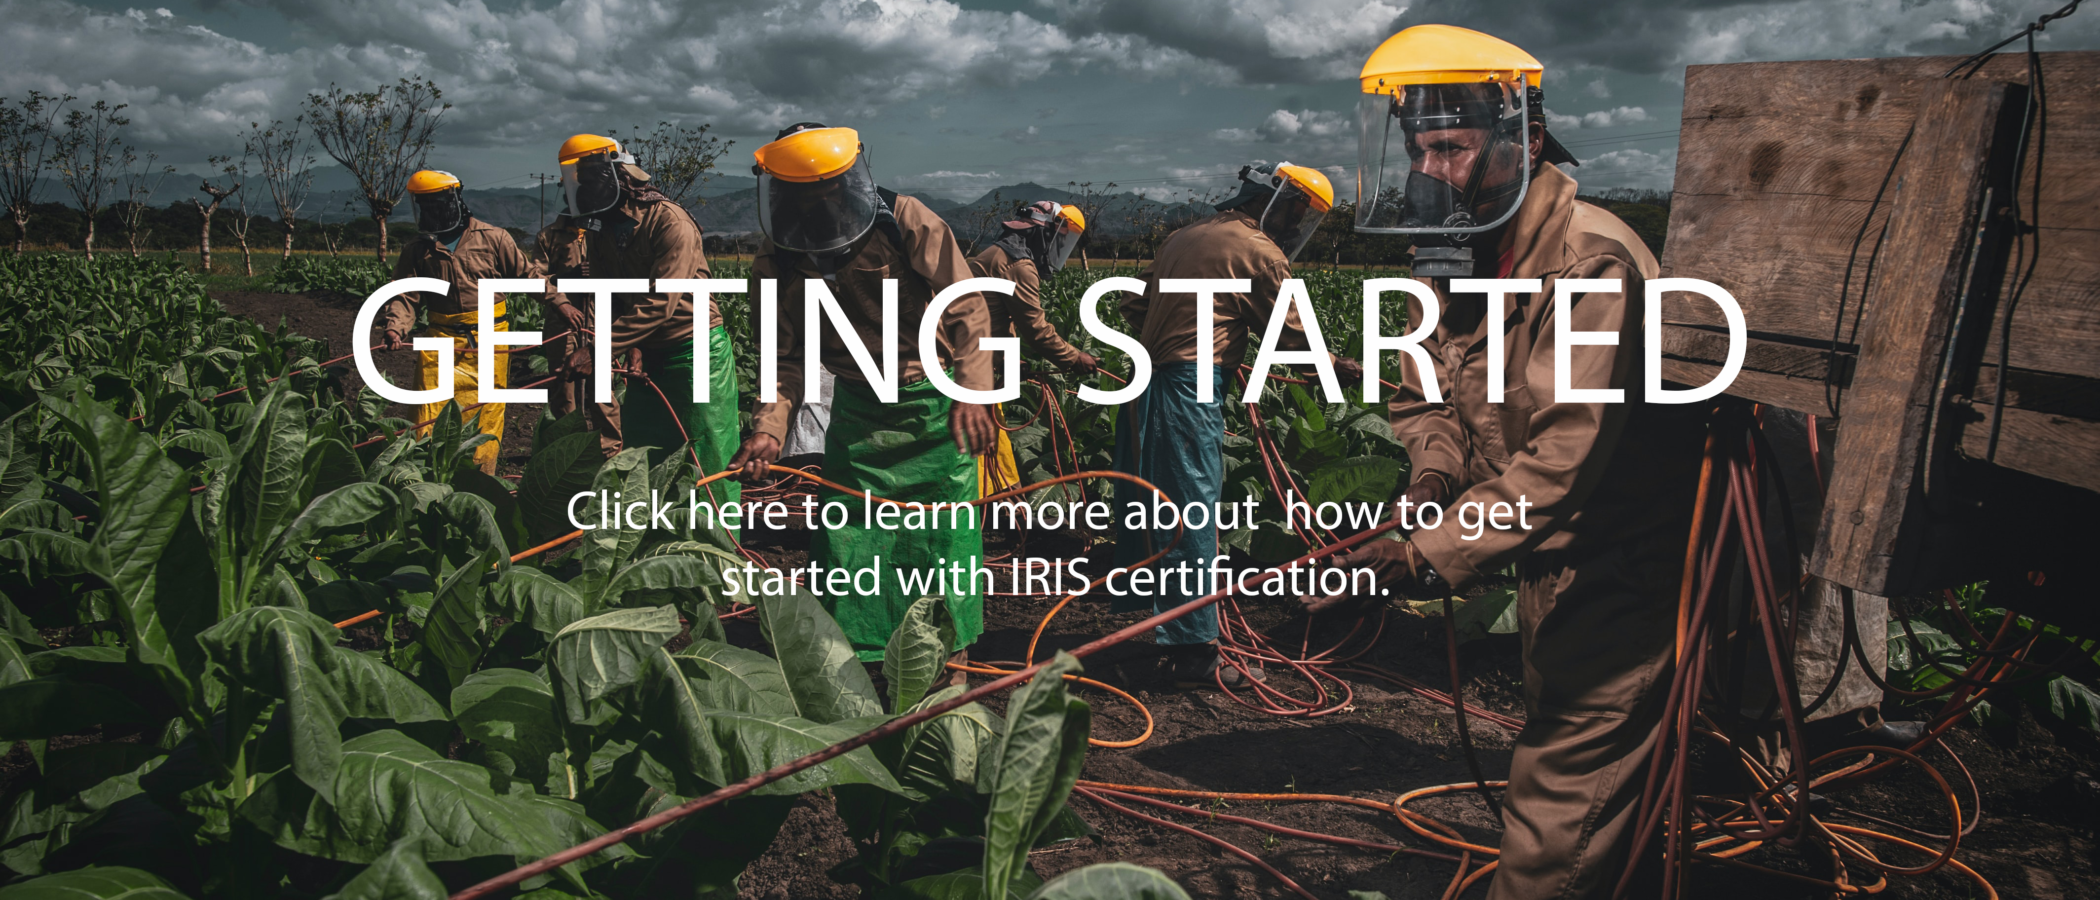 Click here to learn more about how to get started with IRIS certification